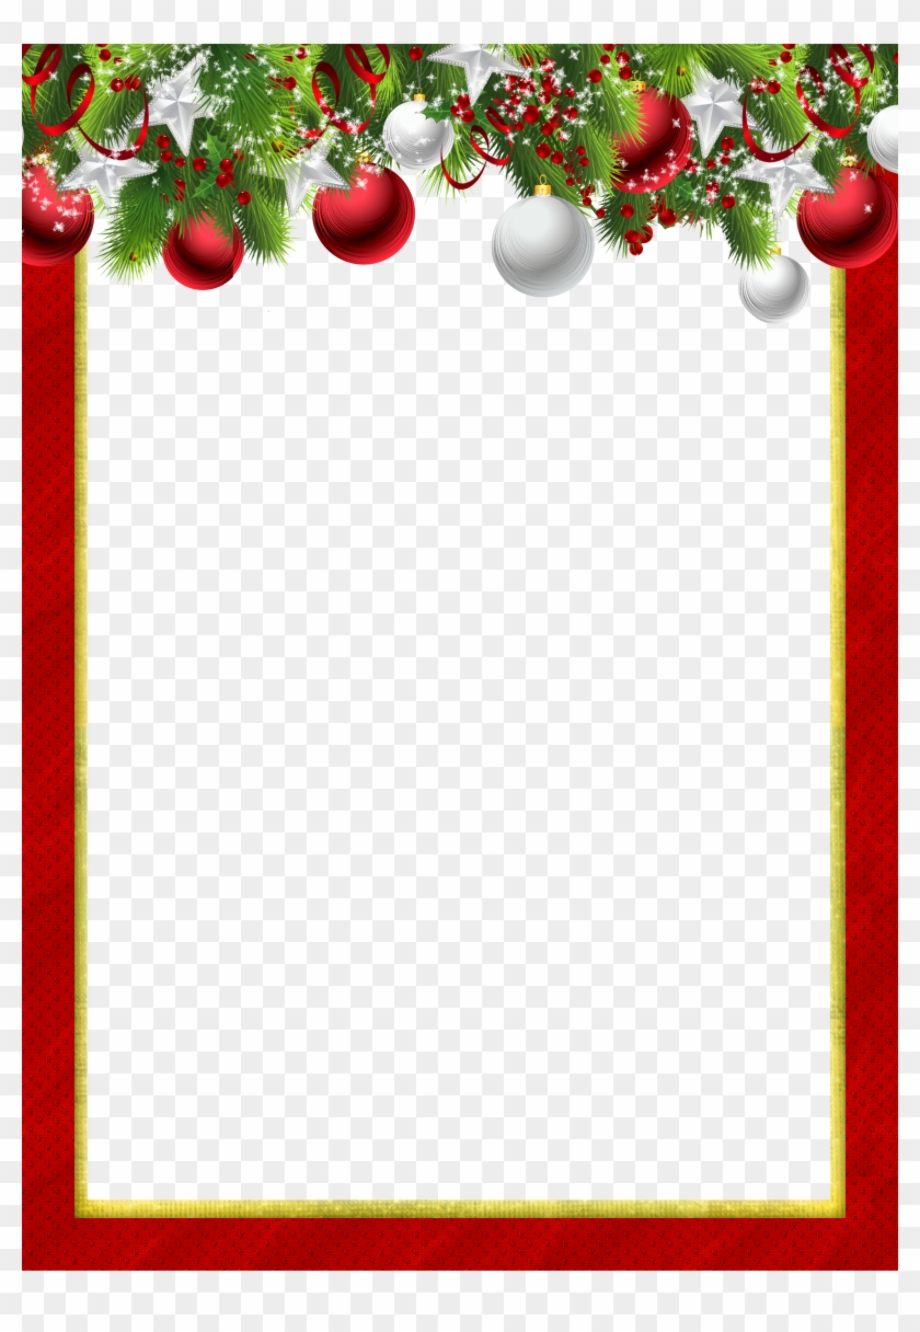 Download High Quality free christmas clipart frame Transparent PNG